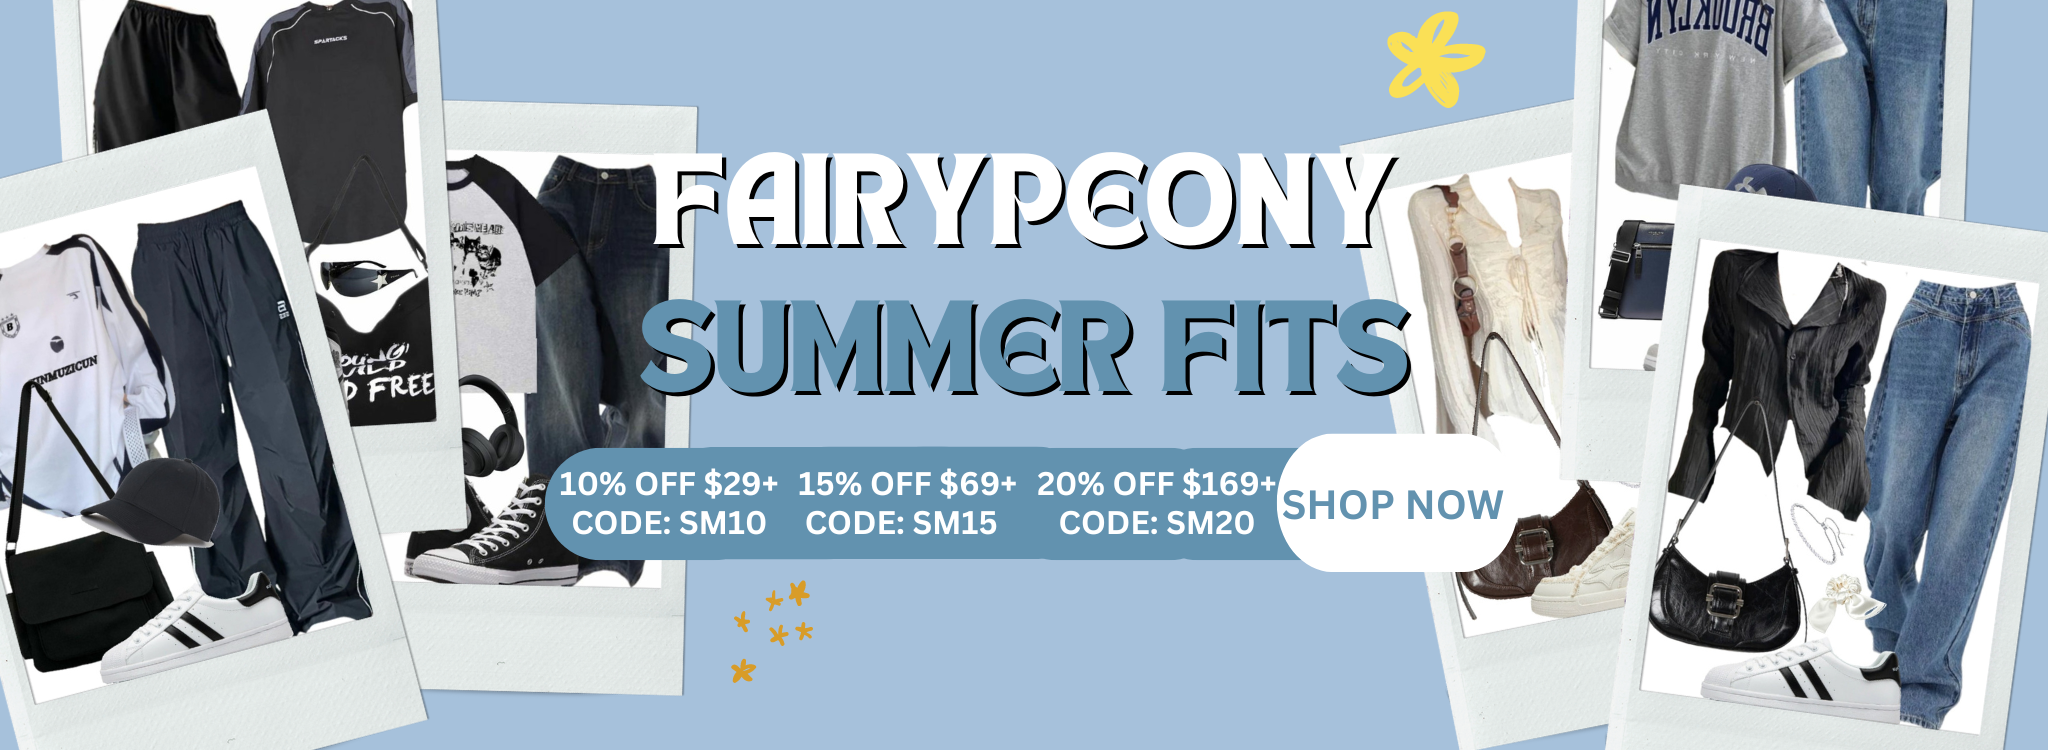 summer-fits-fairypeony